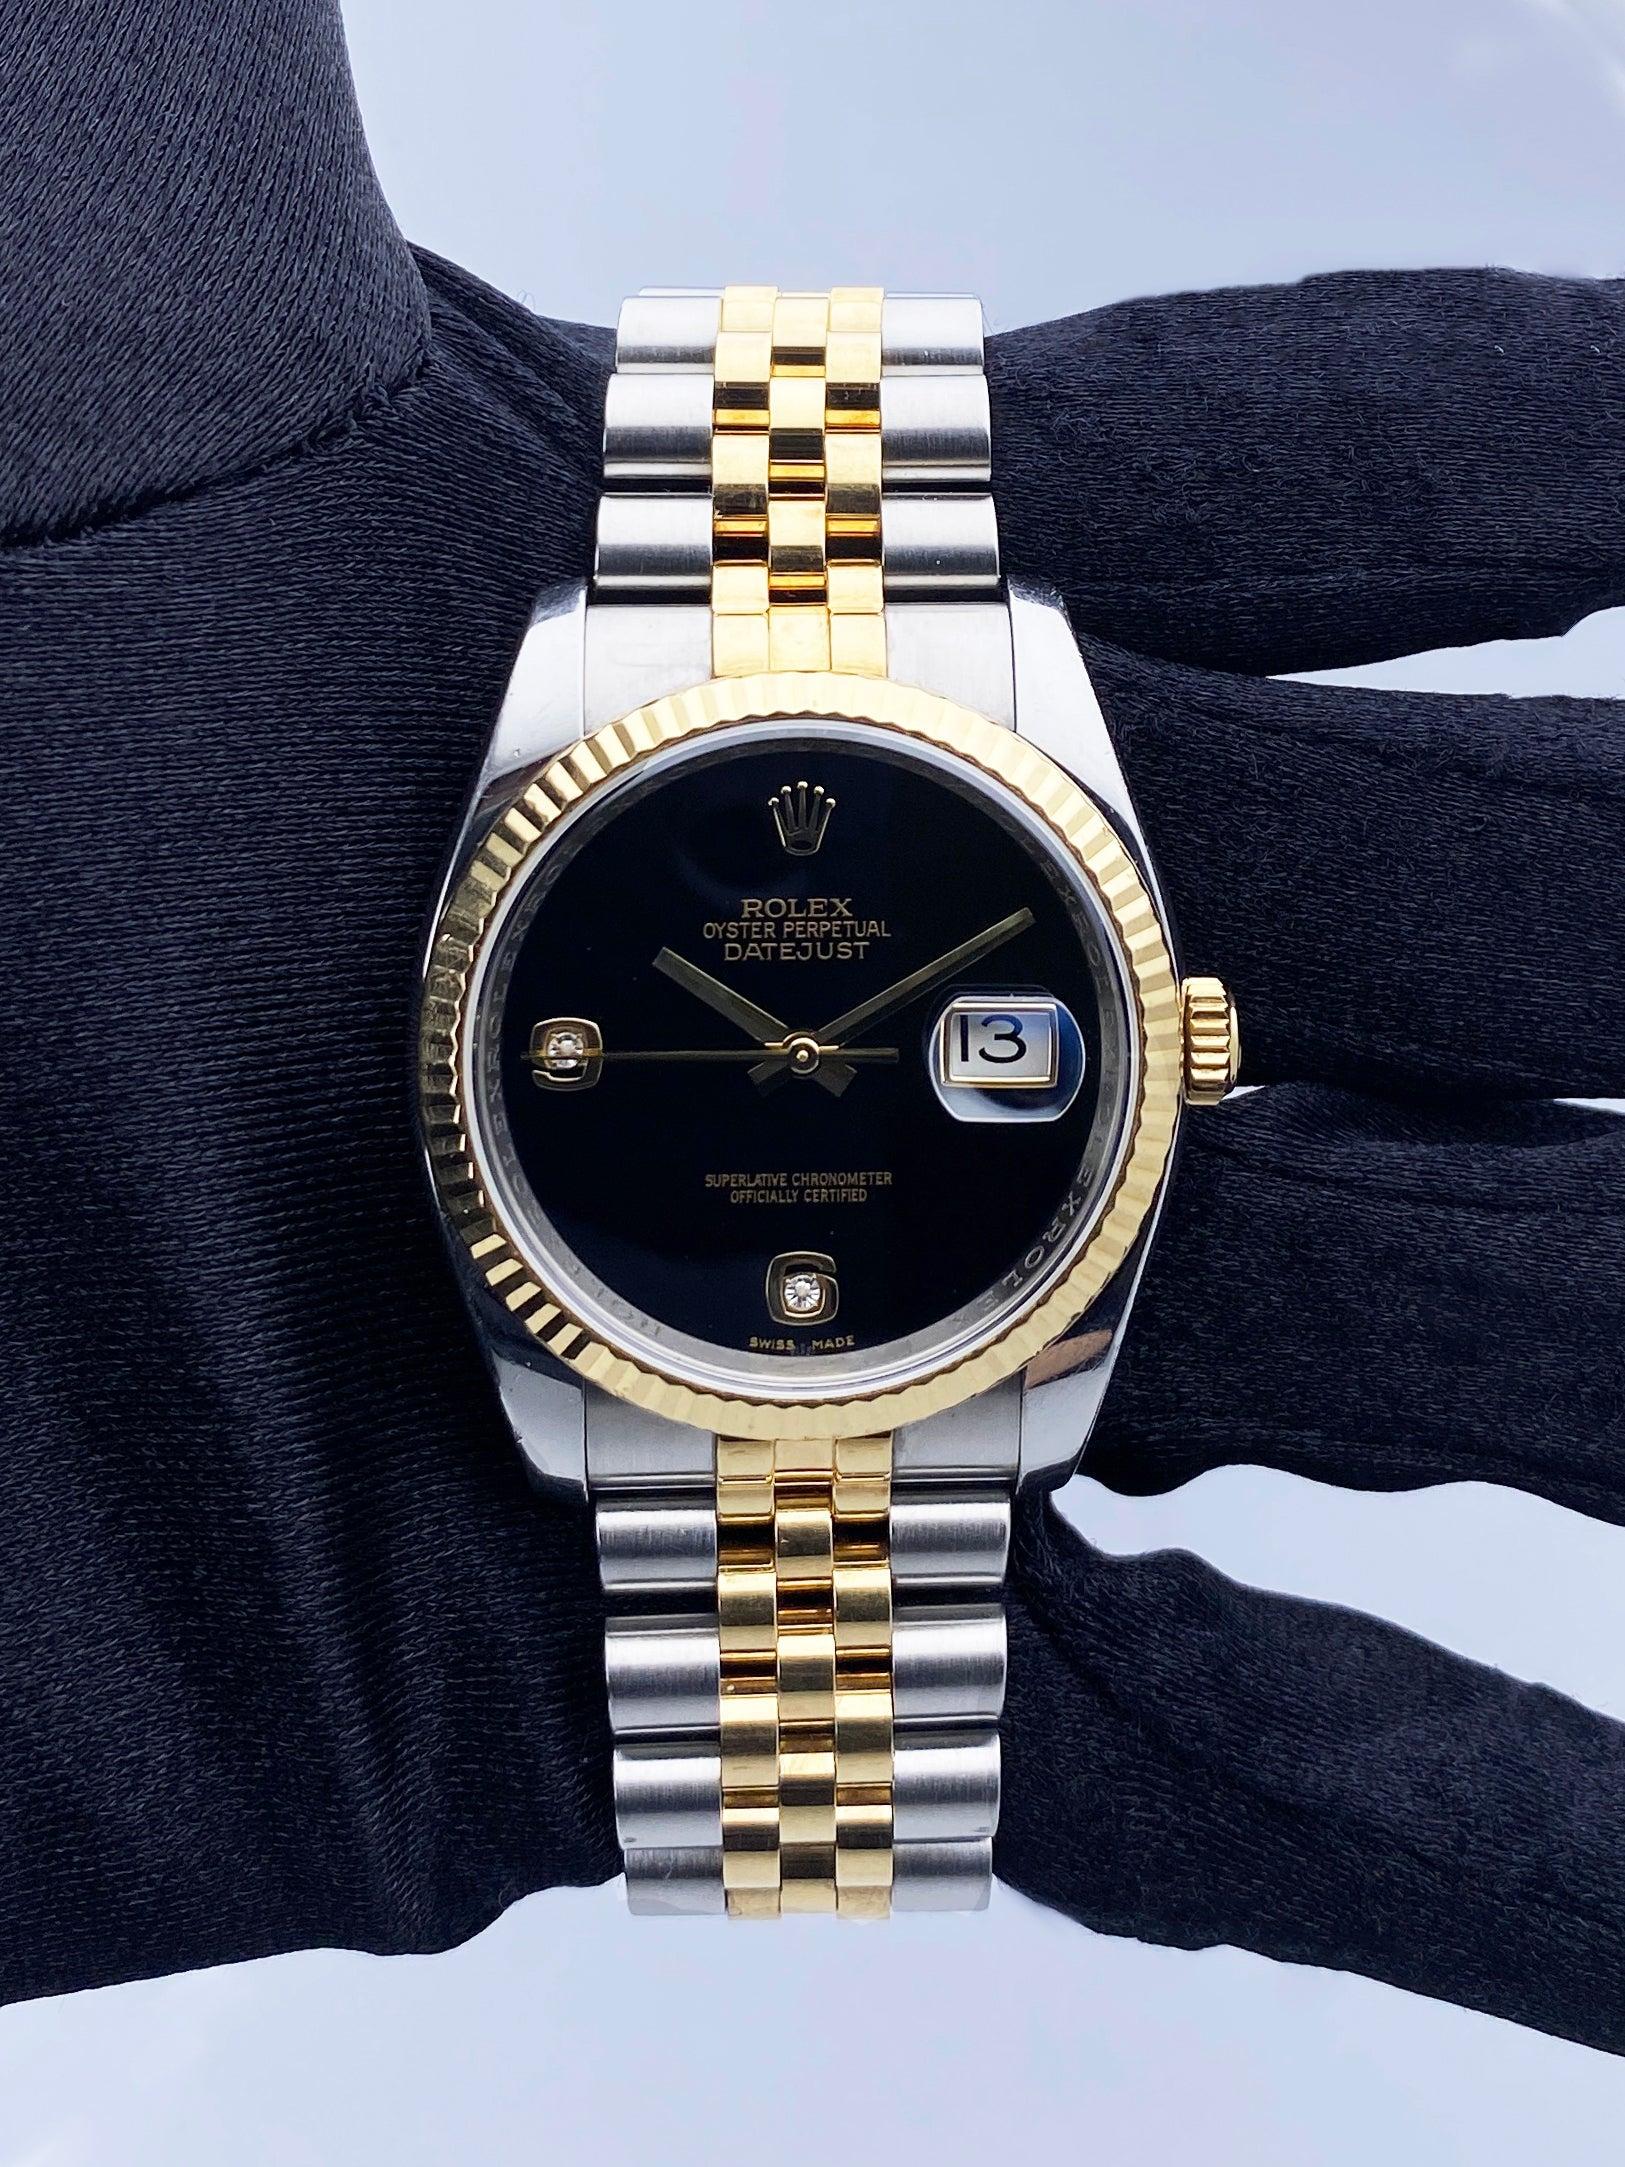 Rolex Oyster Perpetual Datejust 116233 Mens Watch. 36mm stainless steel case with 18K yellow gold fluted bezel. Black onyx dial with gold hands. Gold Arabic numeral with factory diamond hour marker number 6 and 9. Date display at 3 o'clock